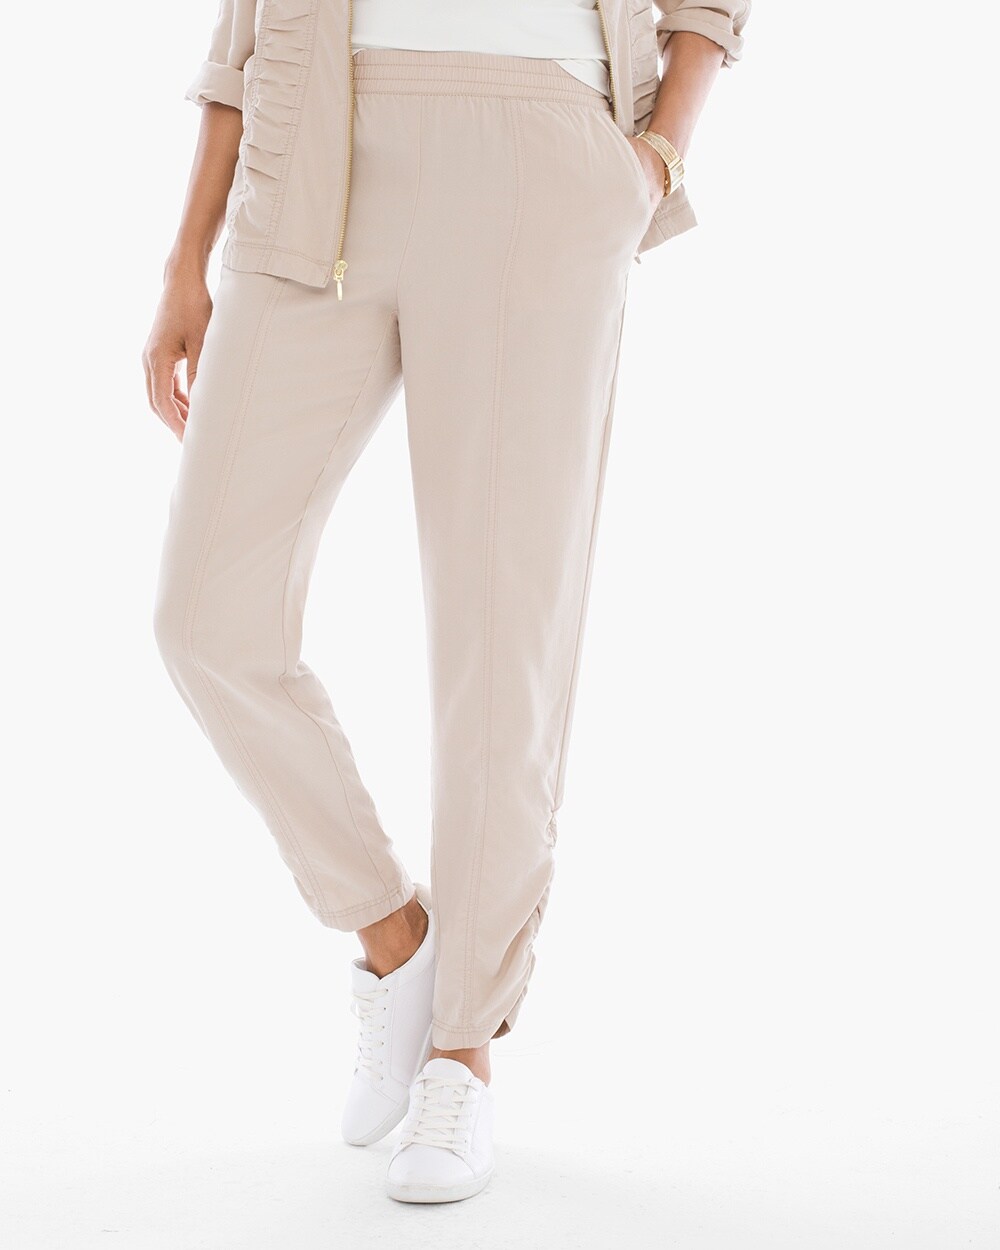 Zenergy Woven Collection Ruched Ankle Pants